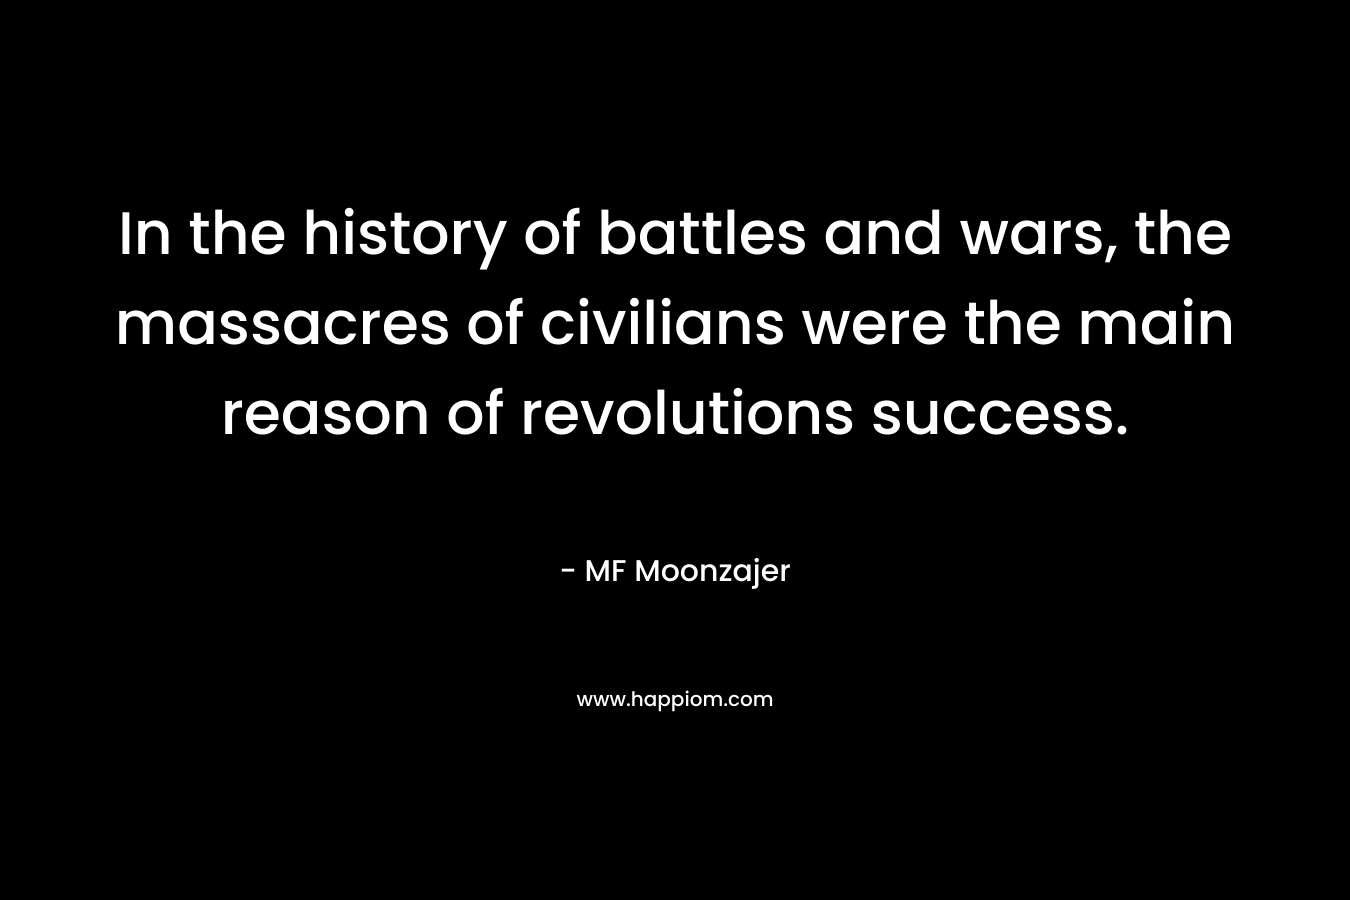 In the history of battles and wars, the massacres of civilians were the main reason of revolutions success.